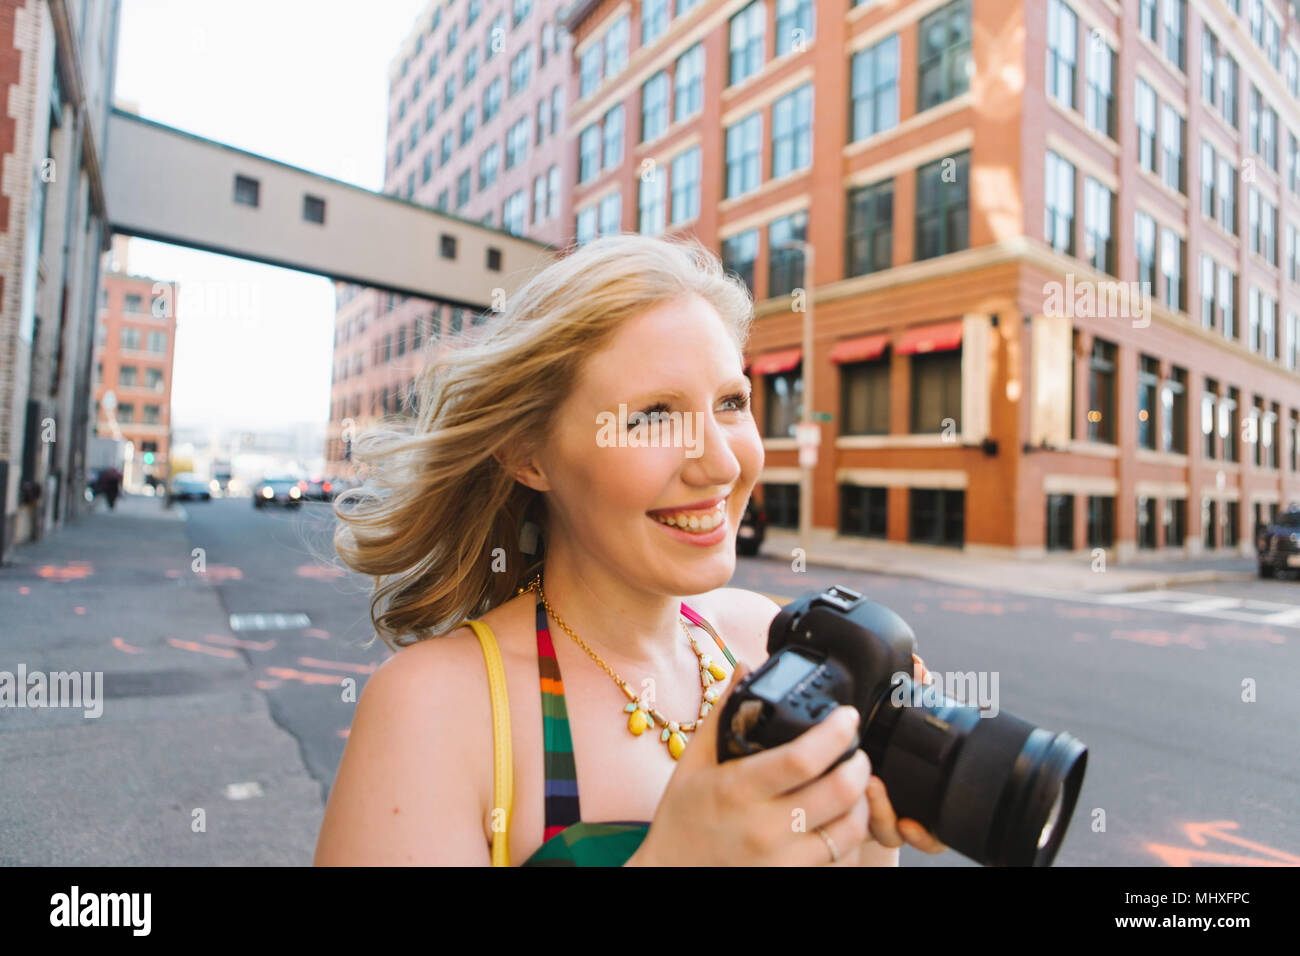 Young woman on city street taking photographs Stock Photo